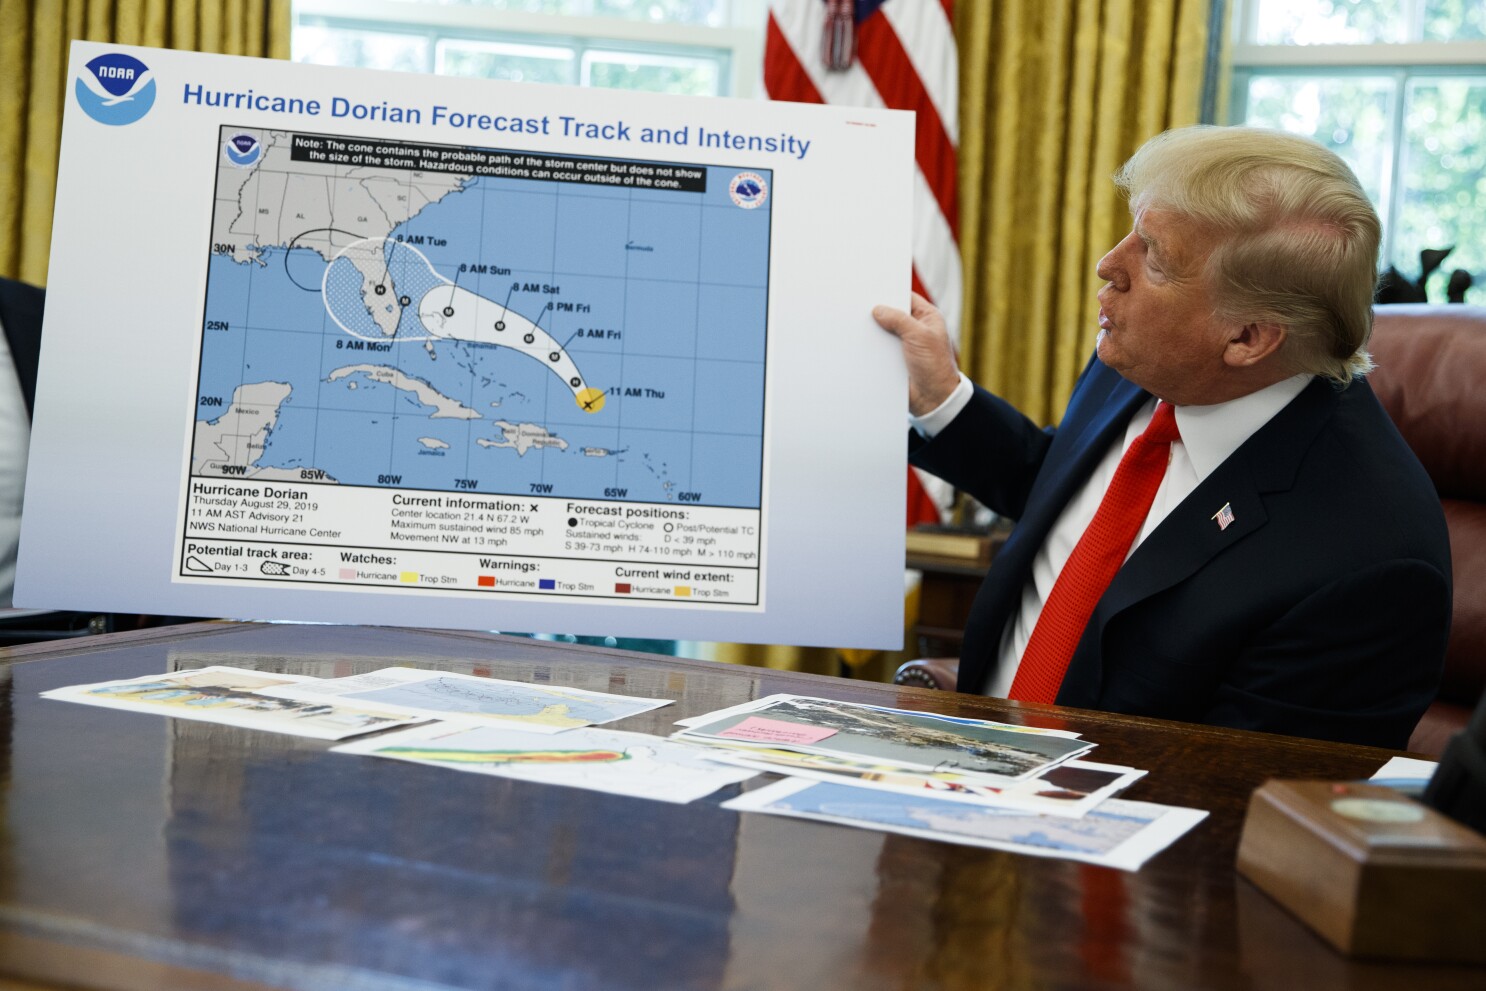 Opinion: Trump's Sharpie is powerful enough to push aside Hurricane Dorian  - Los Angeles Times